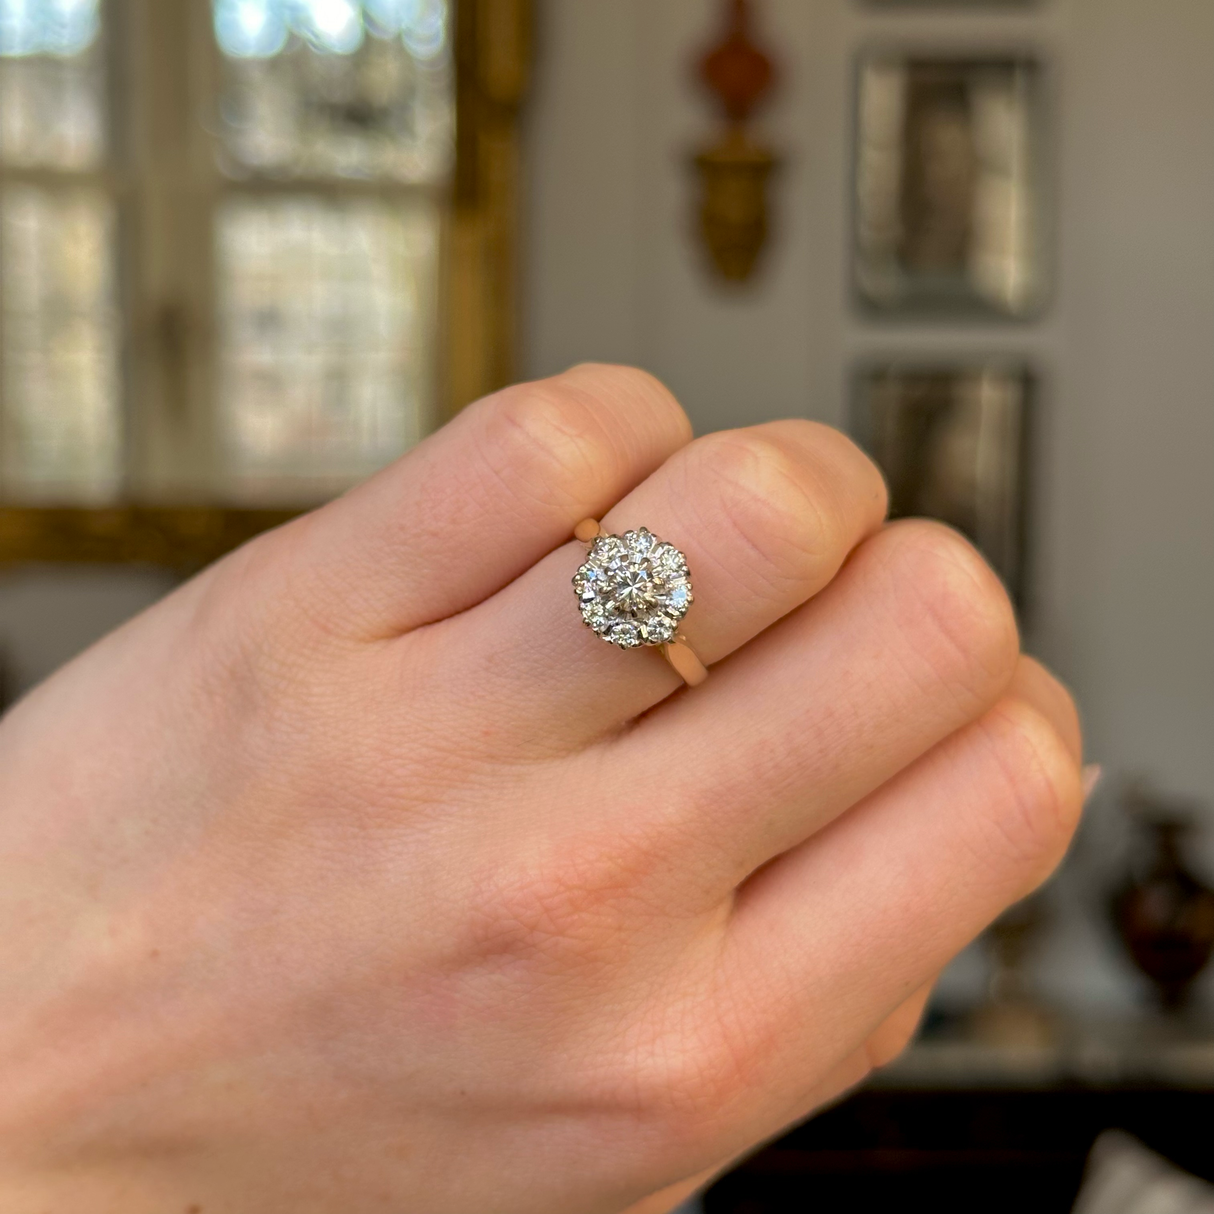 Antique, Edwardian Diamond Cluster Engagement Ring, 18ct Yellow Gold and Platinum worn on closed hand. 